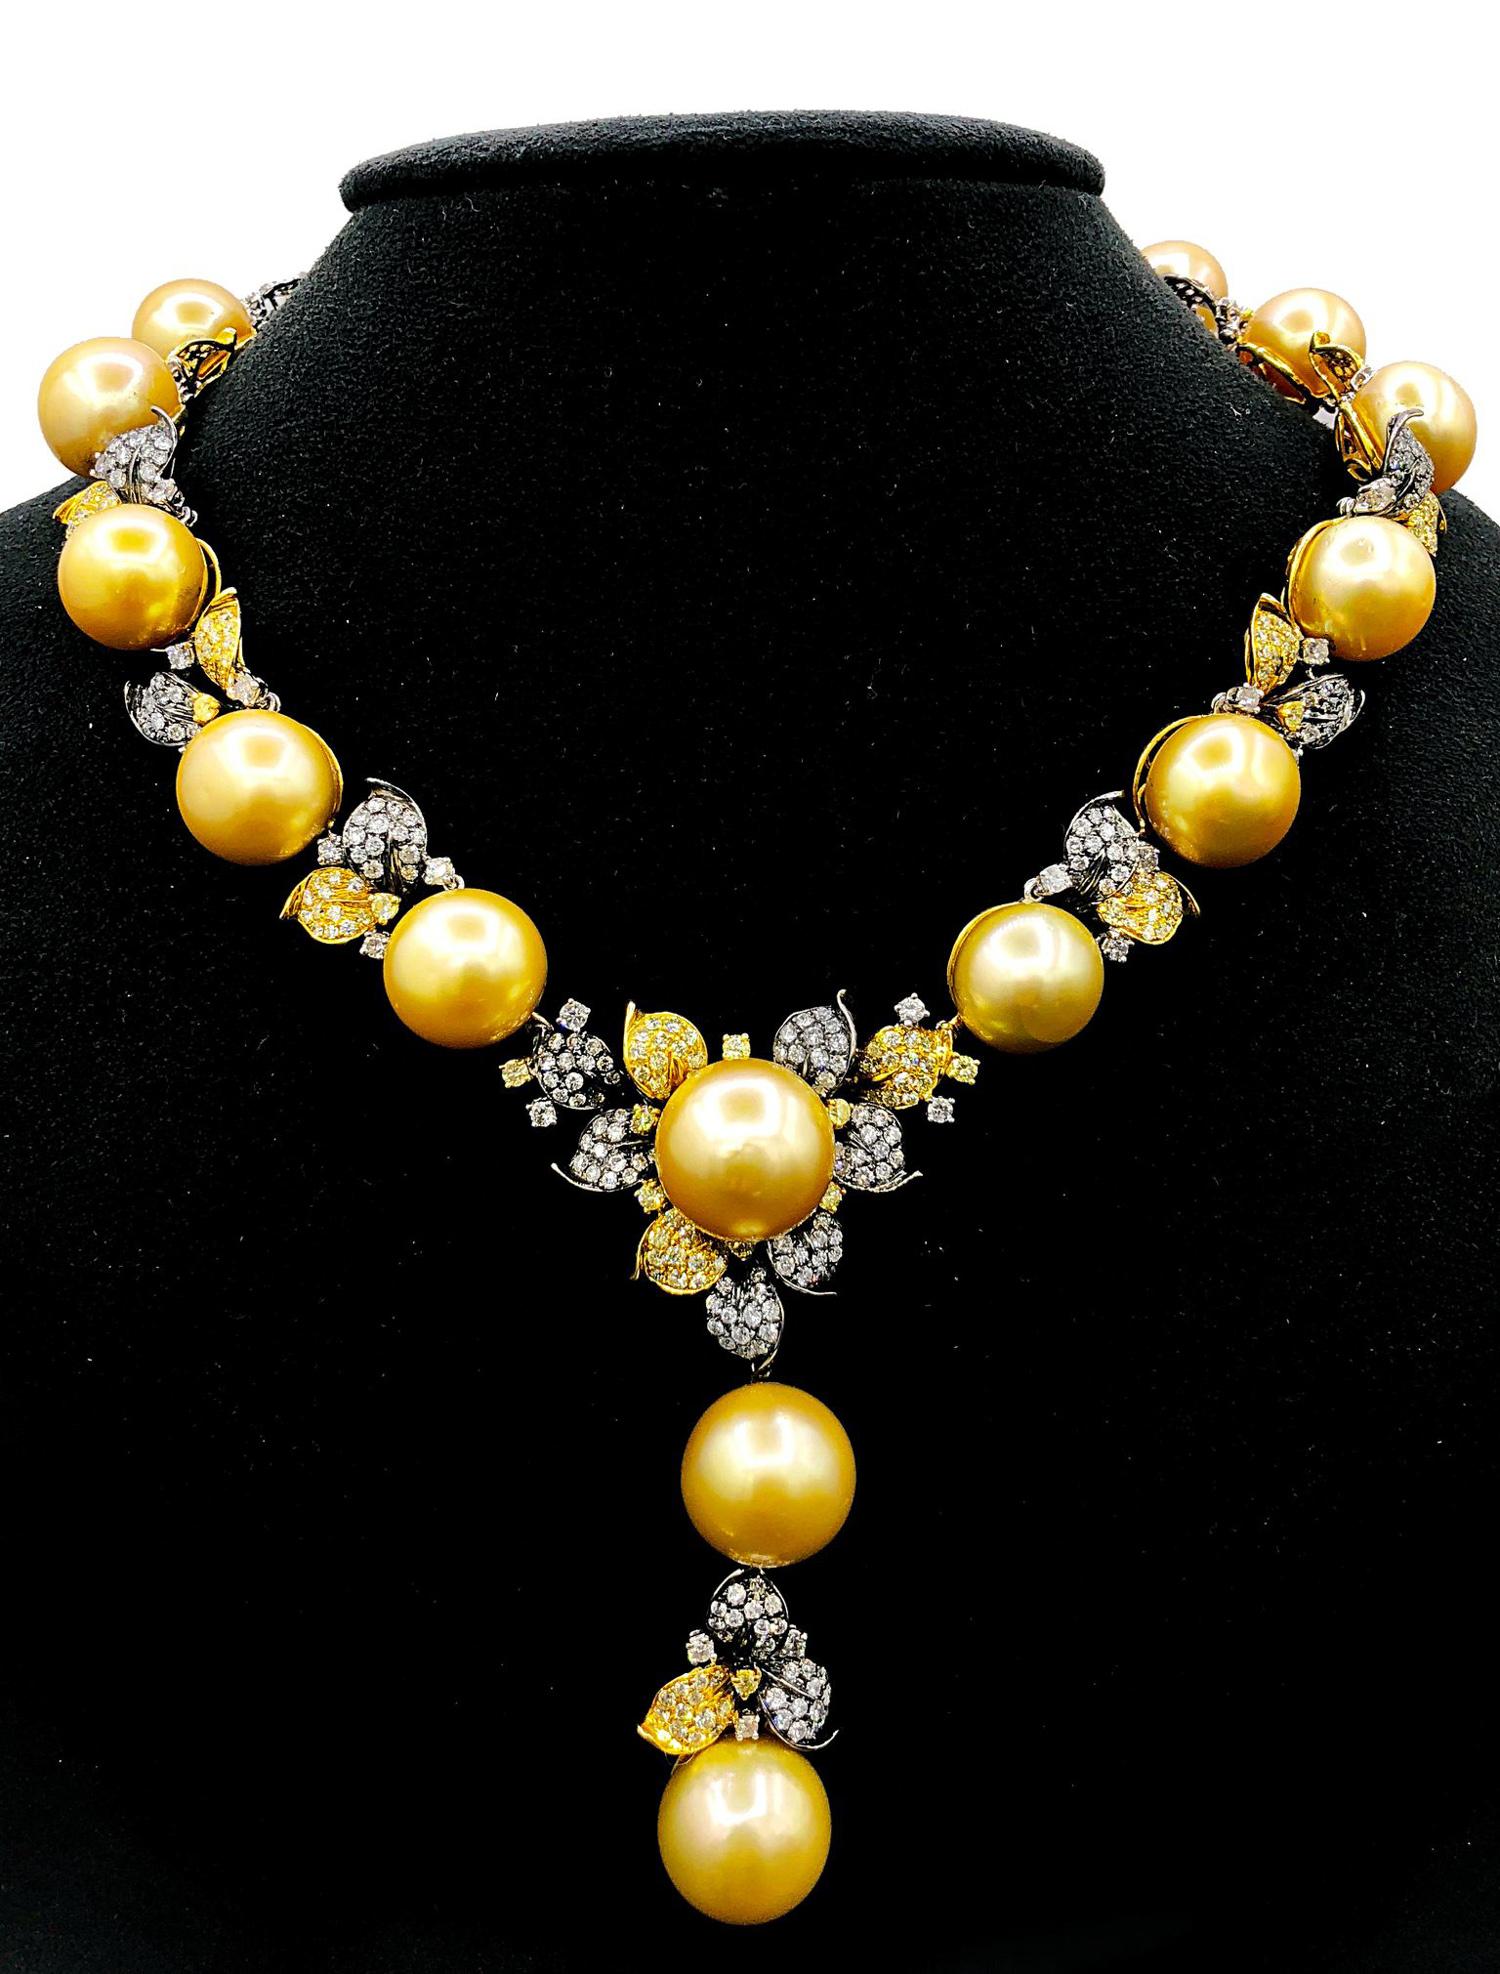 18 kt white and yellow gold black rhodium plated pearl and diamond necklace adorned with flower and leaf designs containing 13.06 cts tw of diamonds.
Diana M. is a leading supplier of top-quality fine jewelry for over 35 years.
Diana M is one-stop